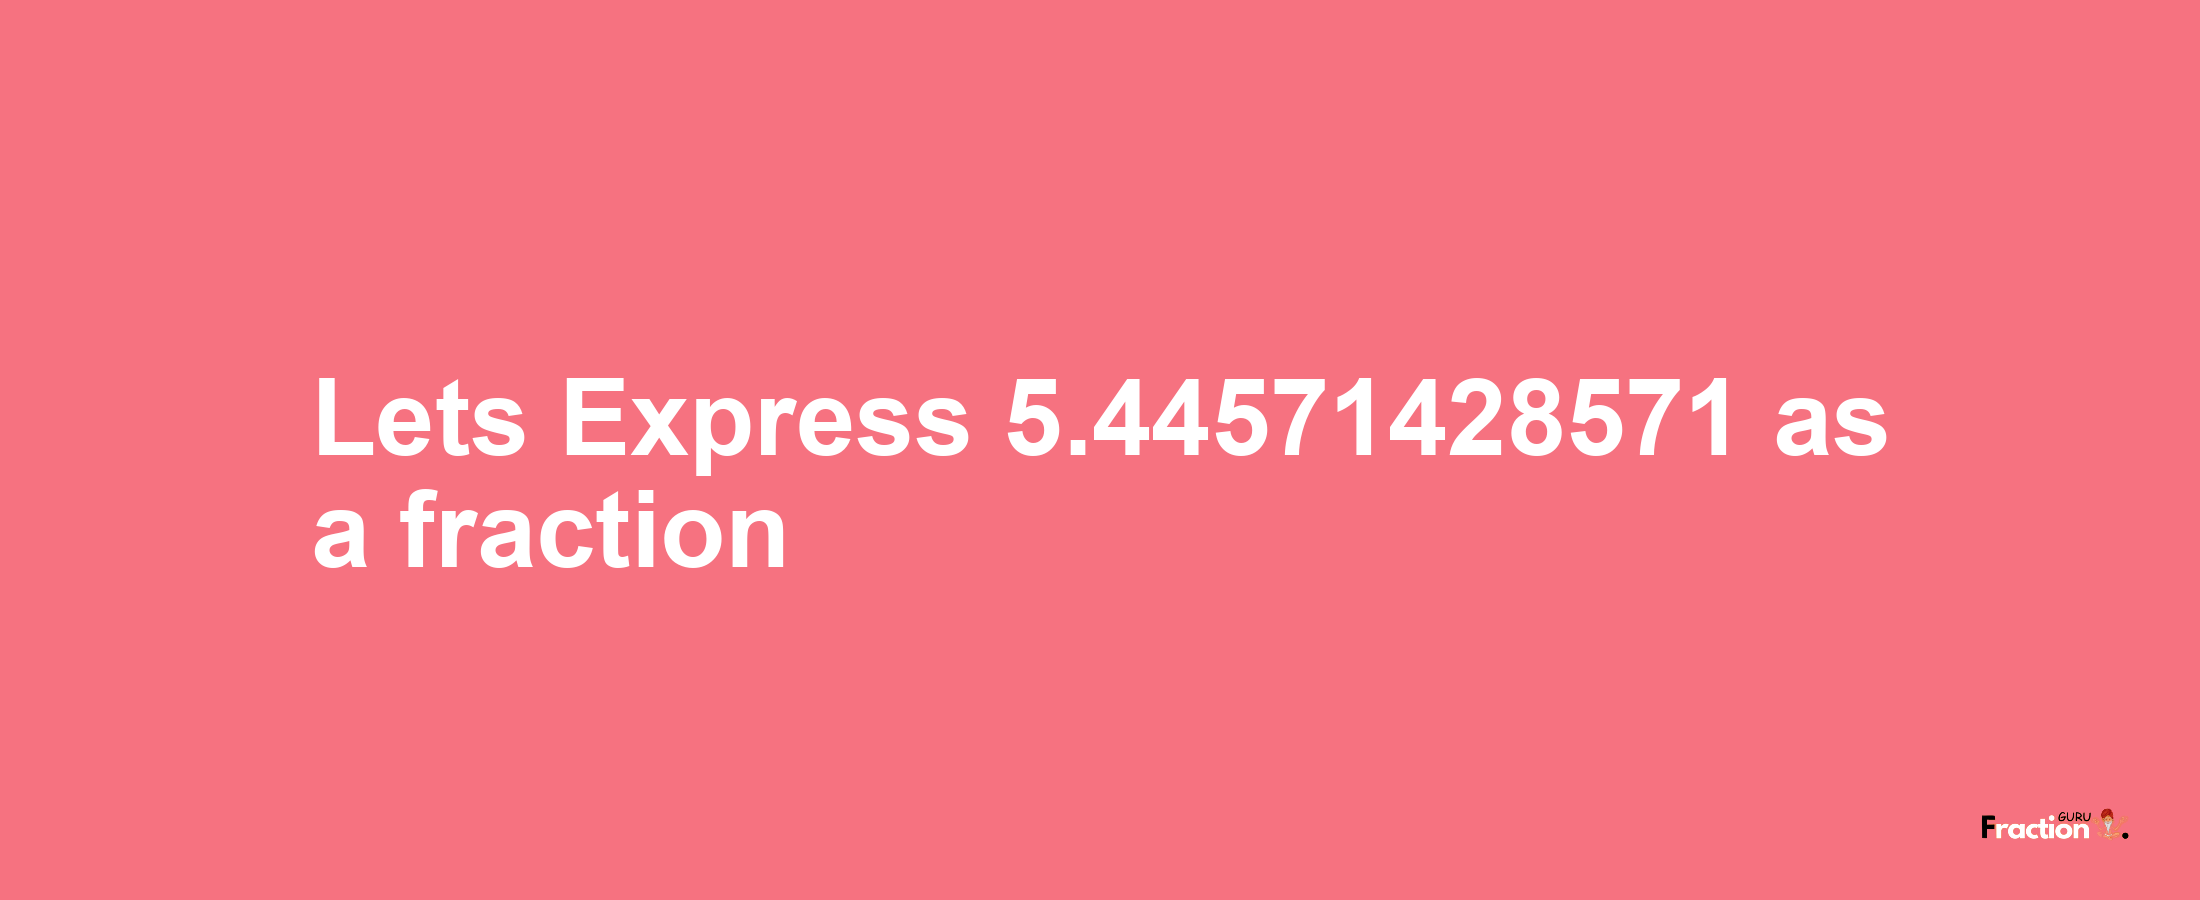 Lets Express 5.44571428571 as afraction